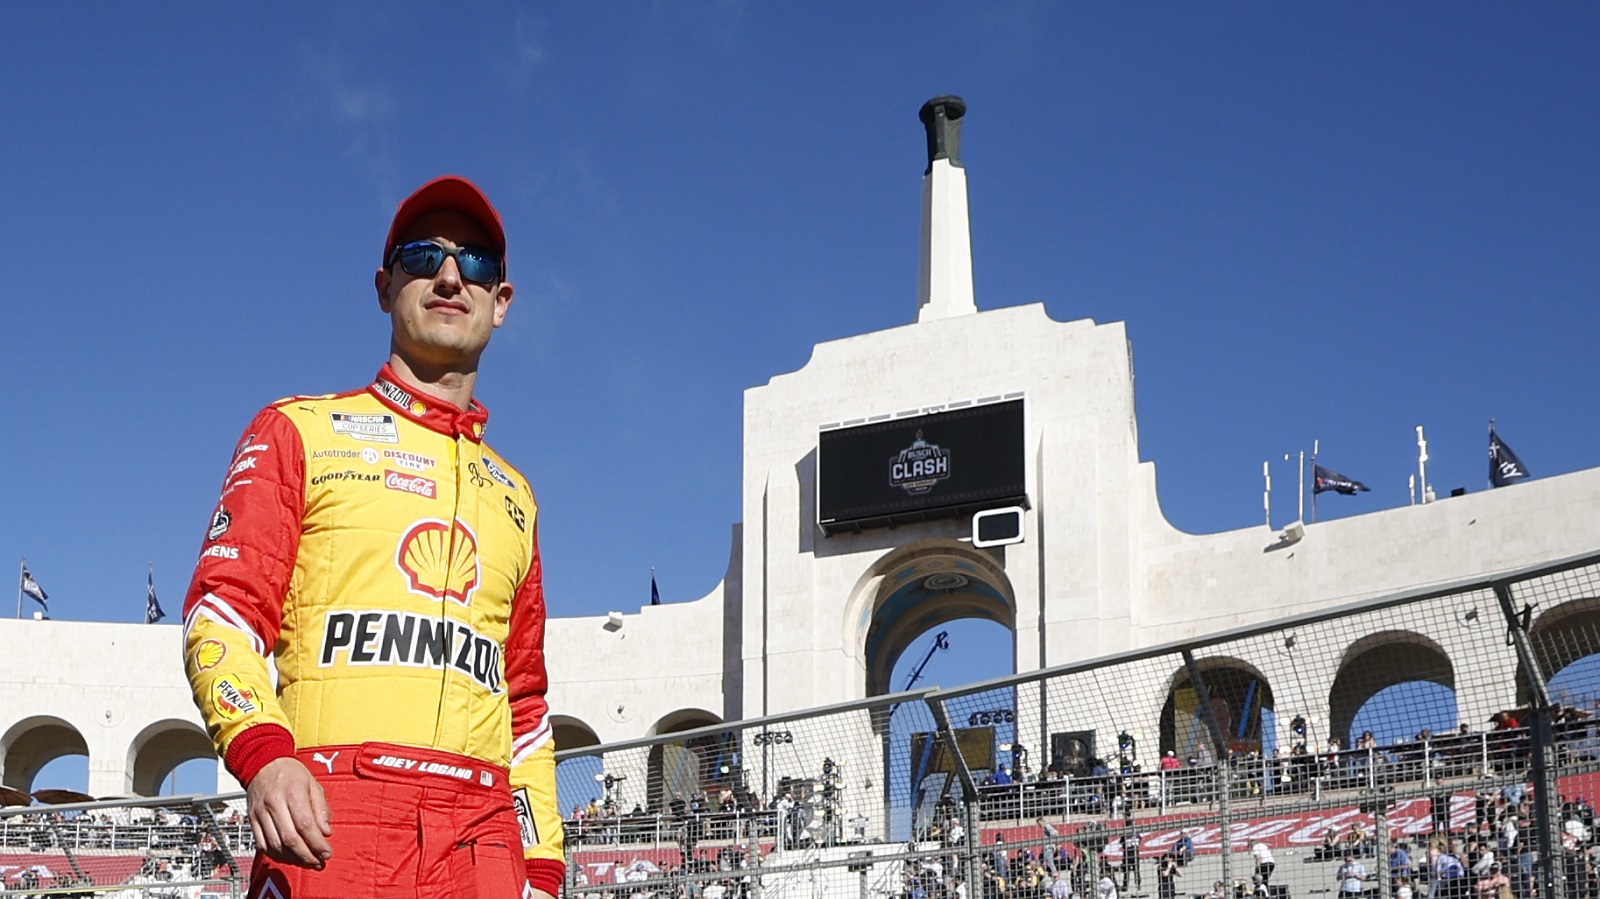 Joey Logano walks the track during driver intros prior to the NASCAR Cup Series Busch Light Clash at the Los Angeles Memorial Coliseum on Feb. 06, 2022. | Chris Graythen/Getty Images